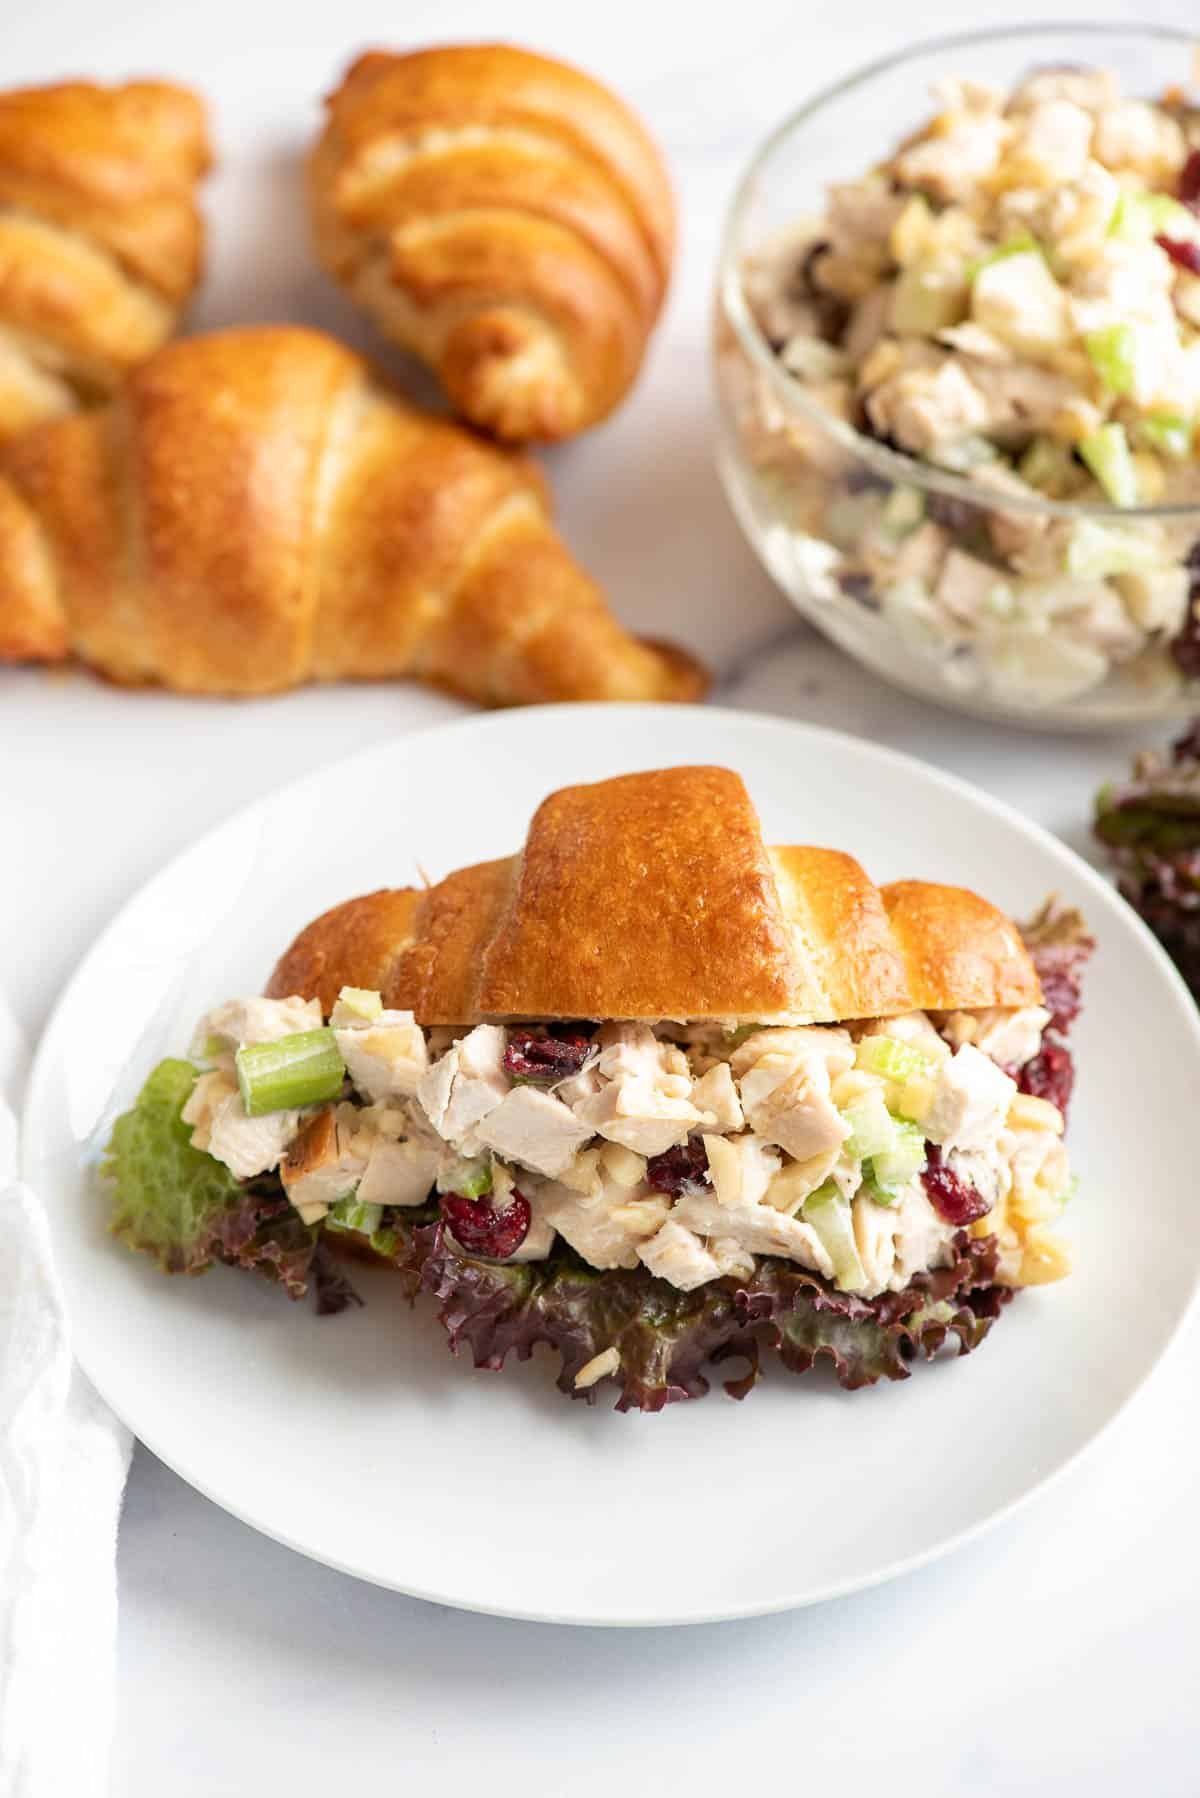 cranberry chicken salad on croissant plated